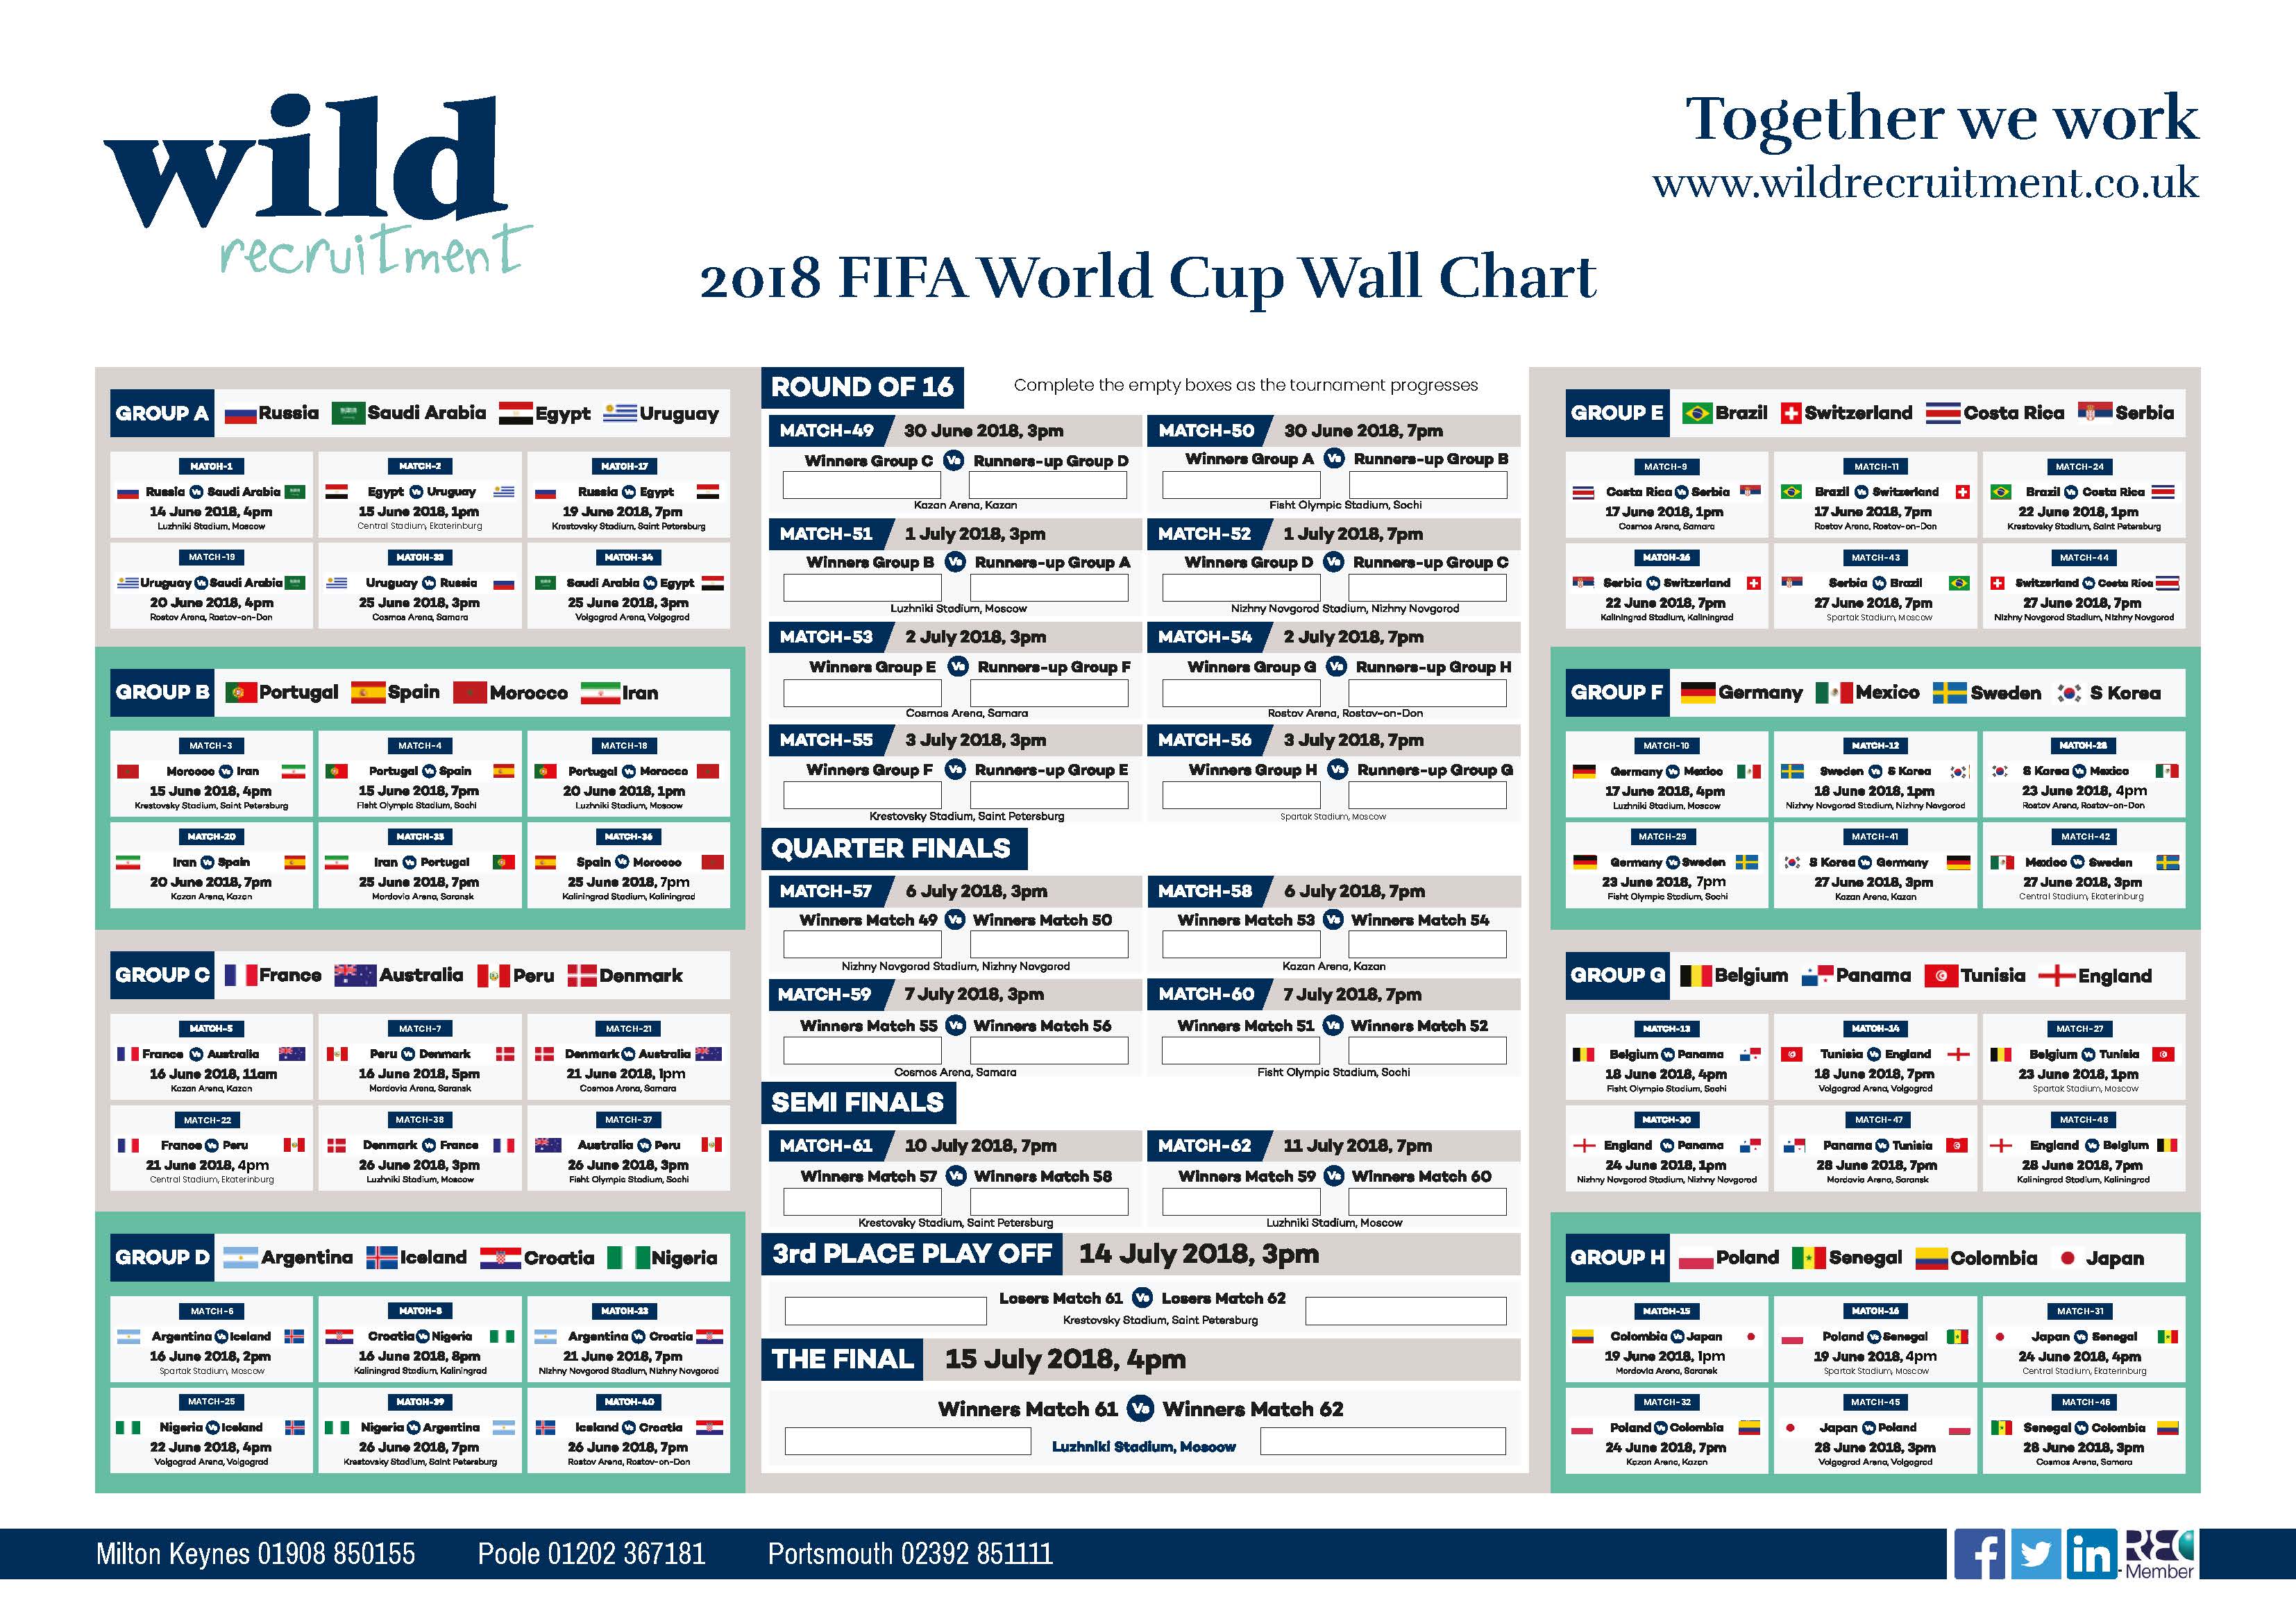 Download your free World Cup Wall Chart.